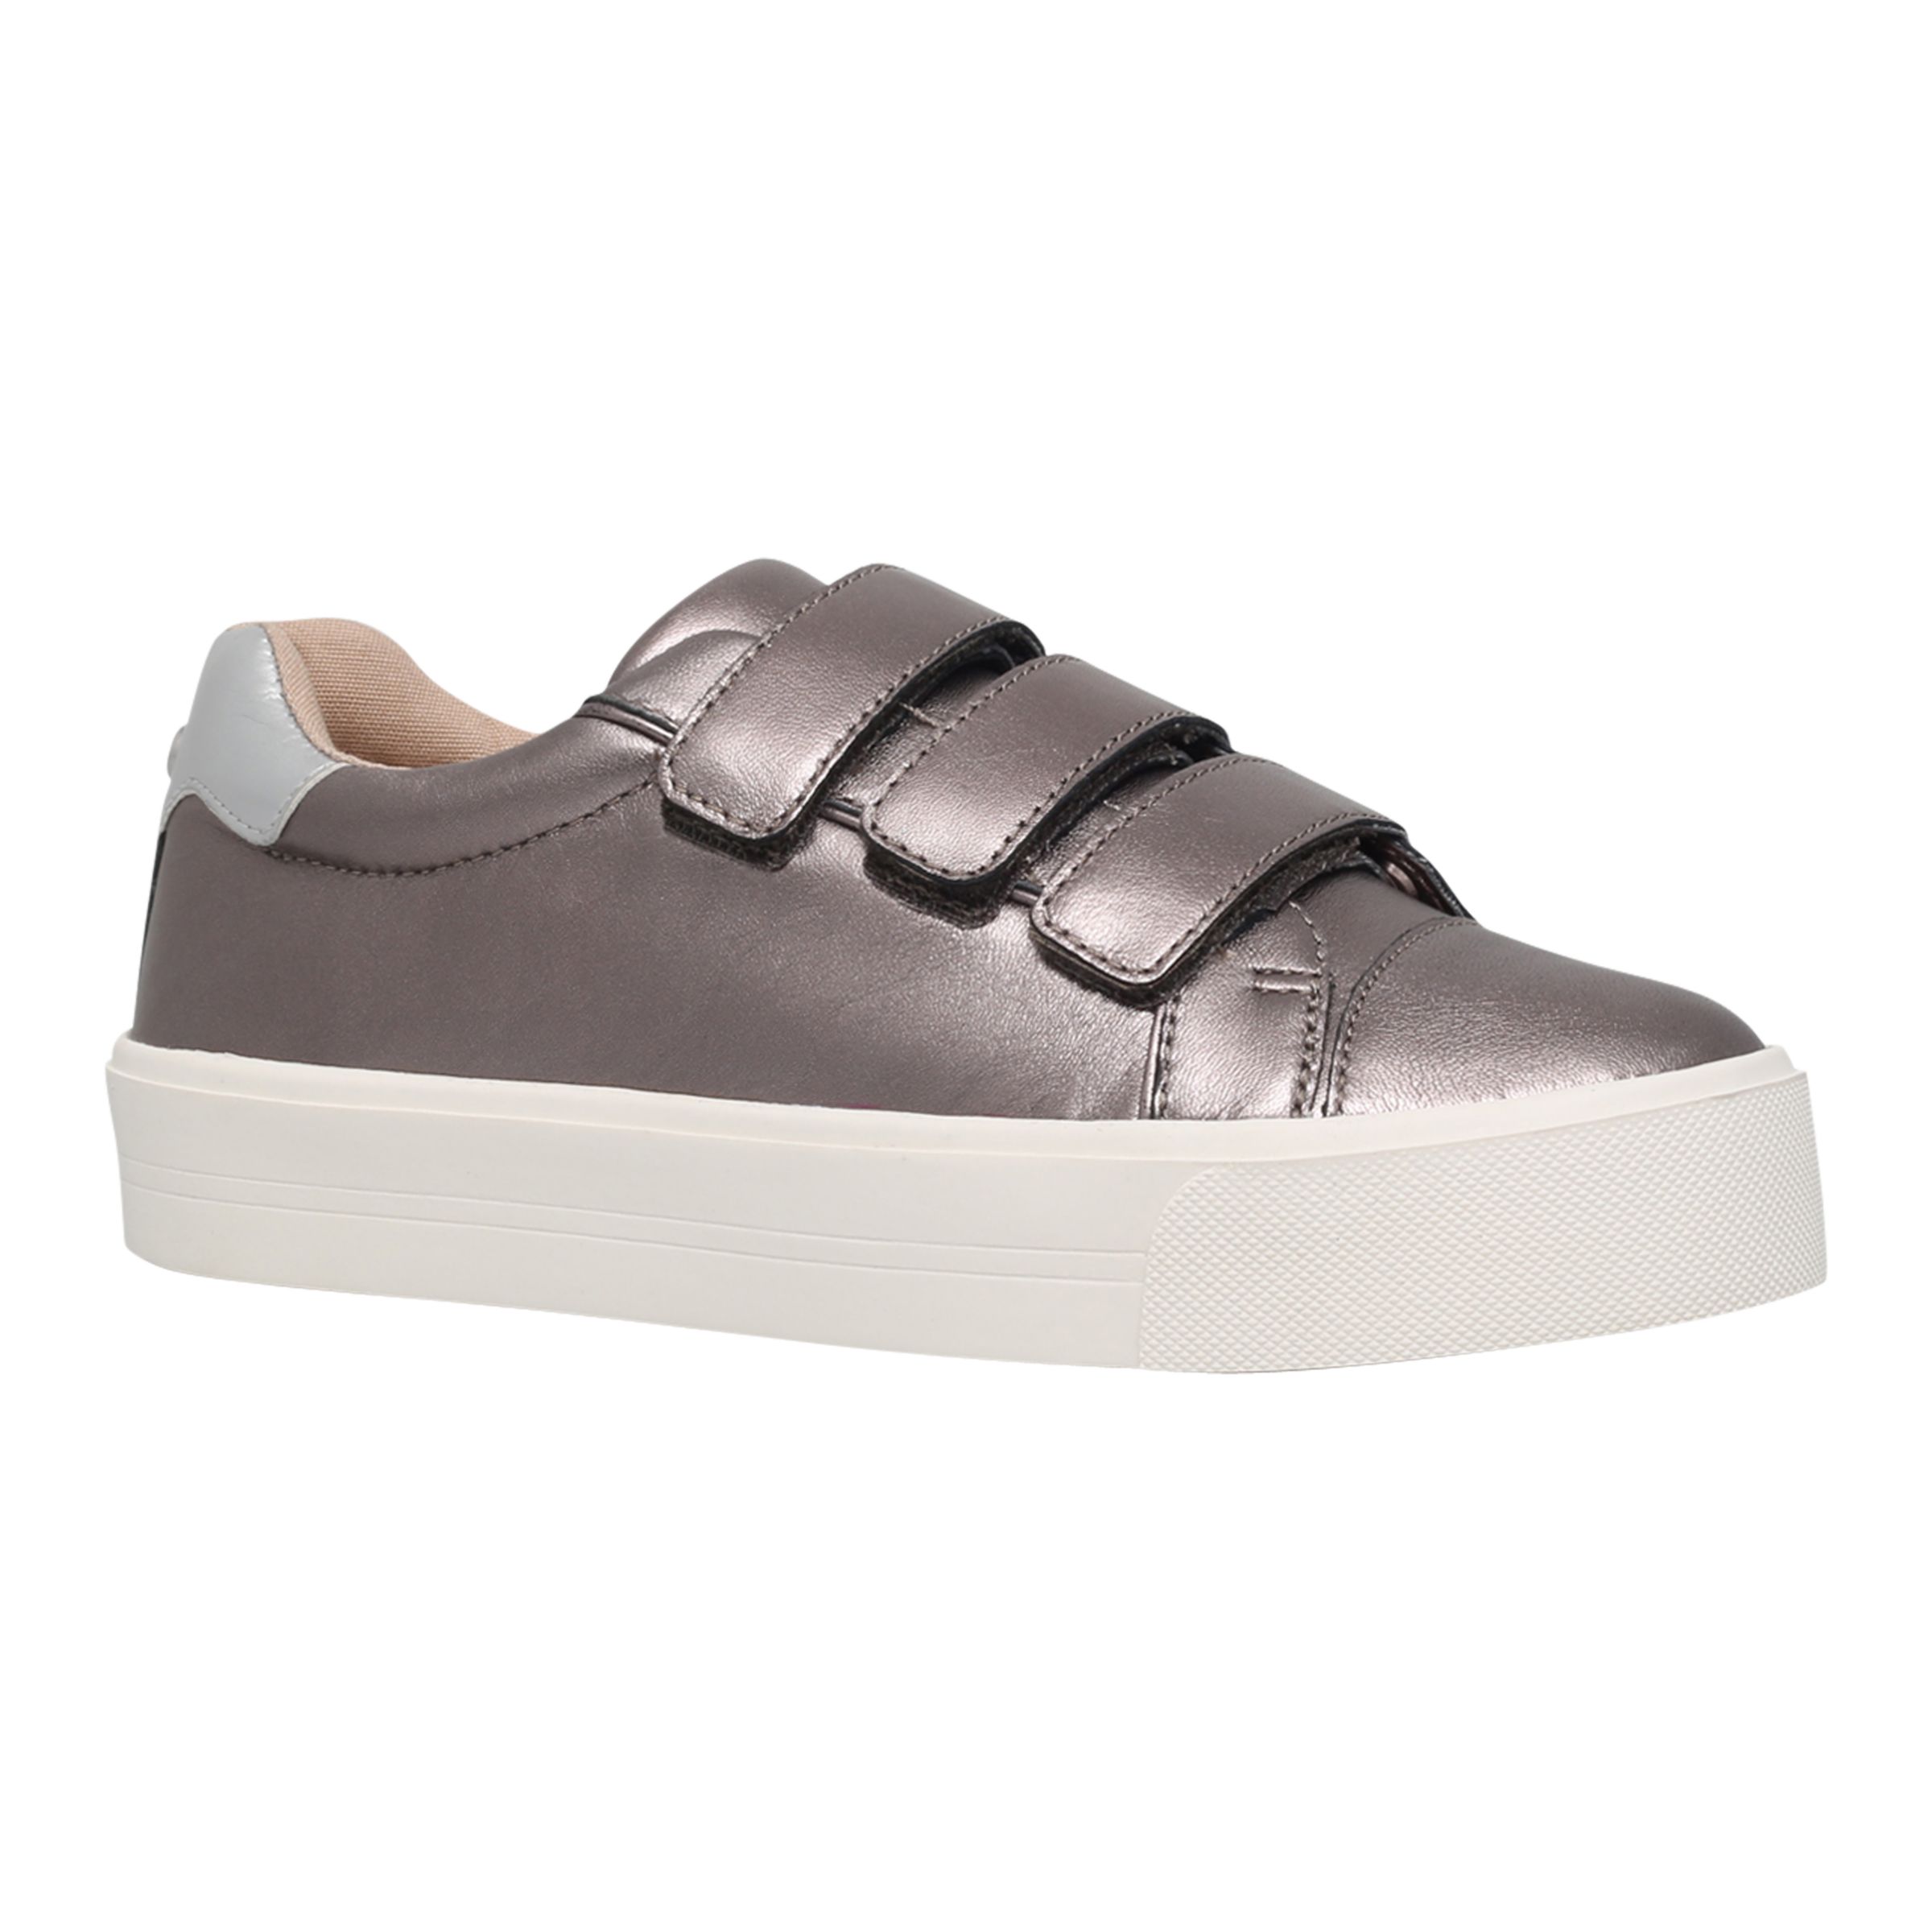 Carvela Lily Leather Sports Shoes, Pewter, 4